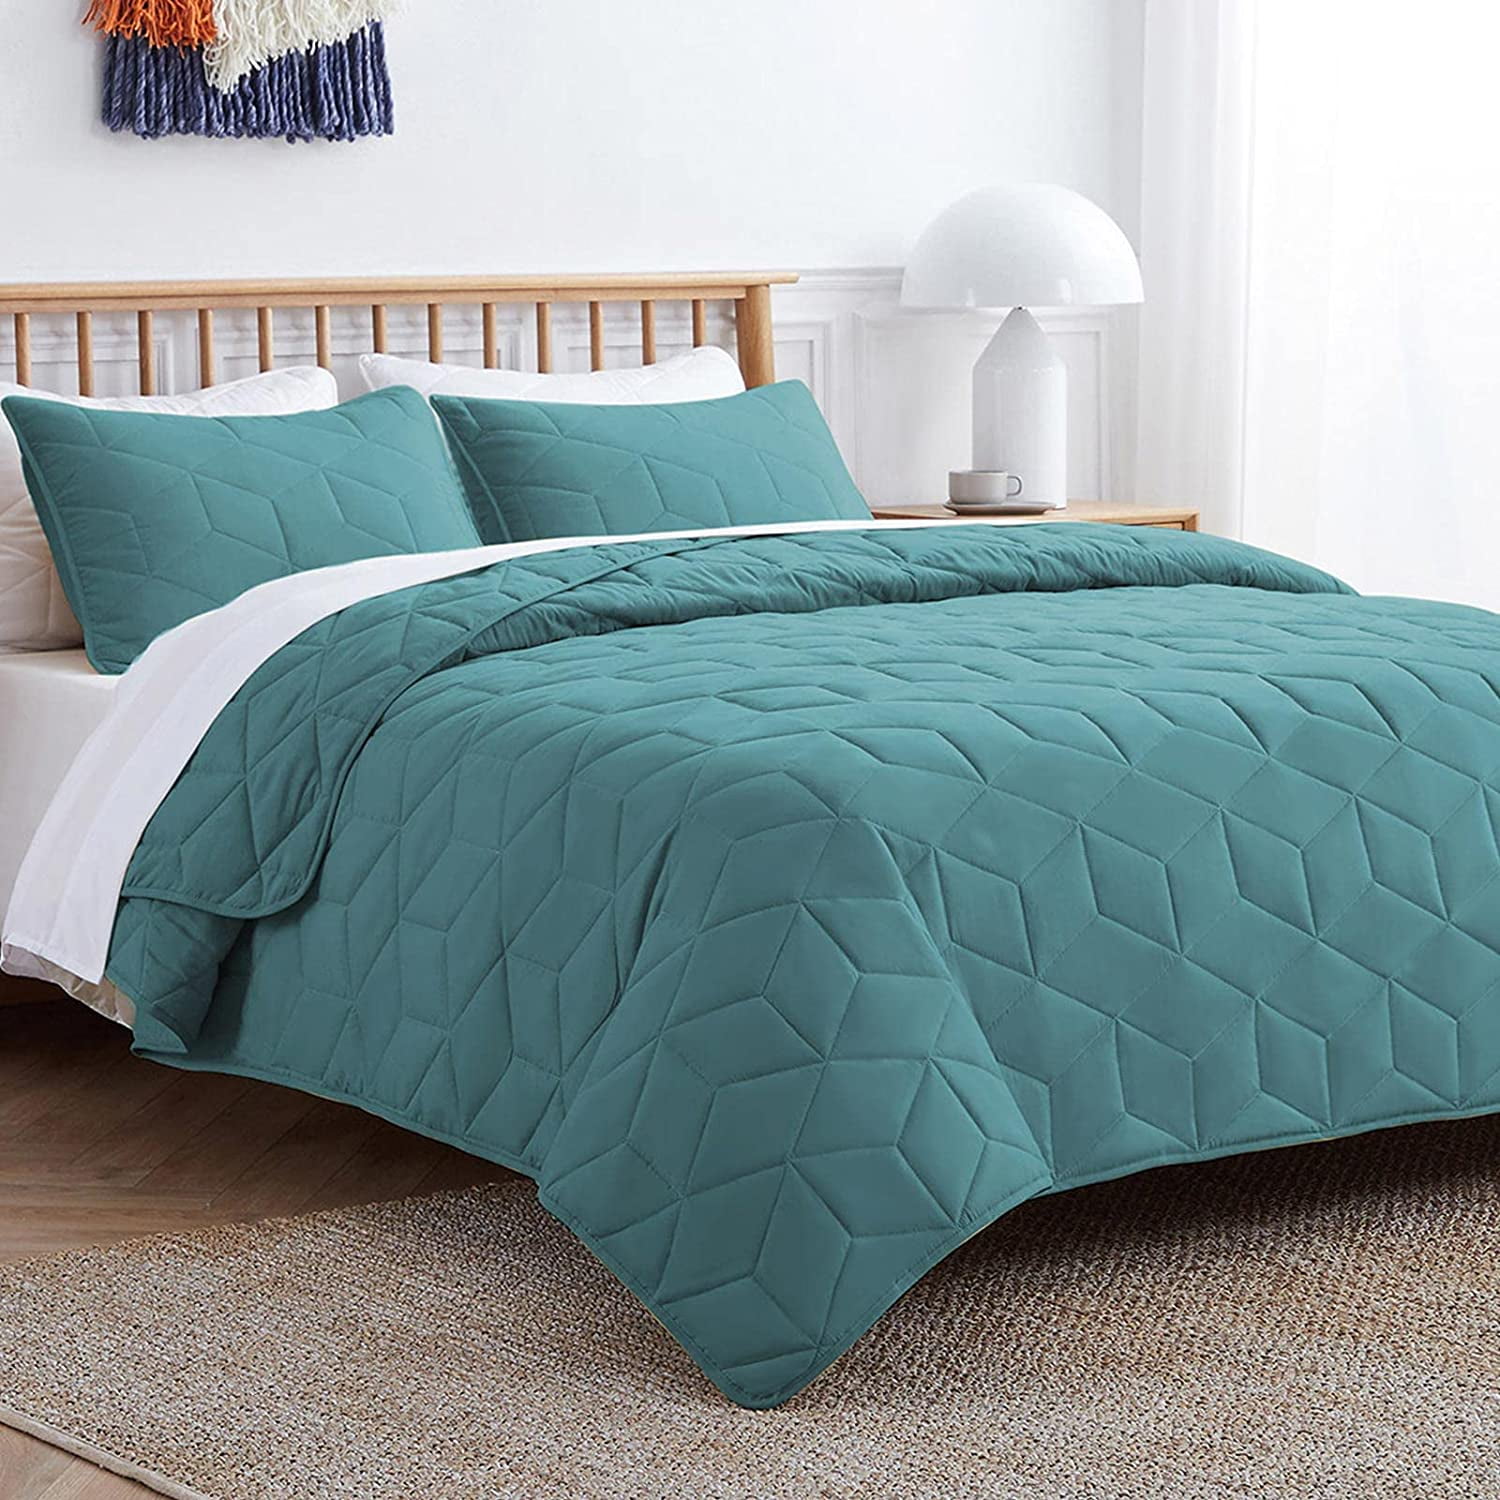 Super King Size Turquoise & Grey Lightweight Bedspread Comforter Size 260x280 cm 